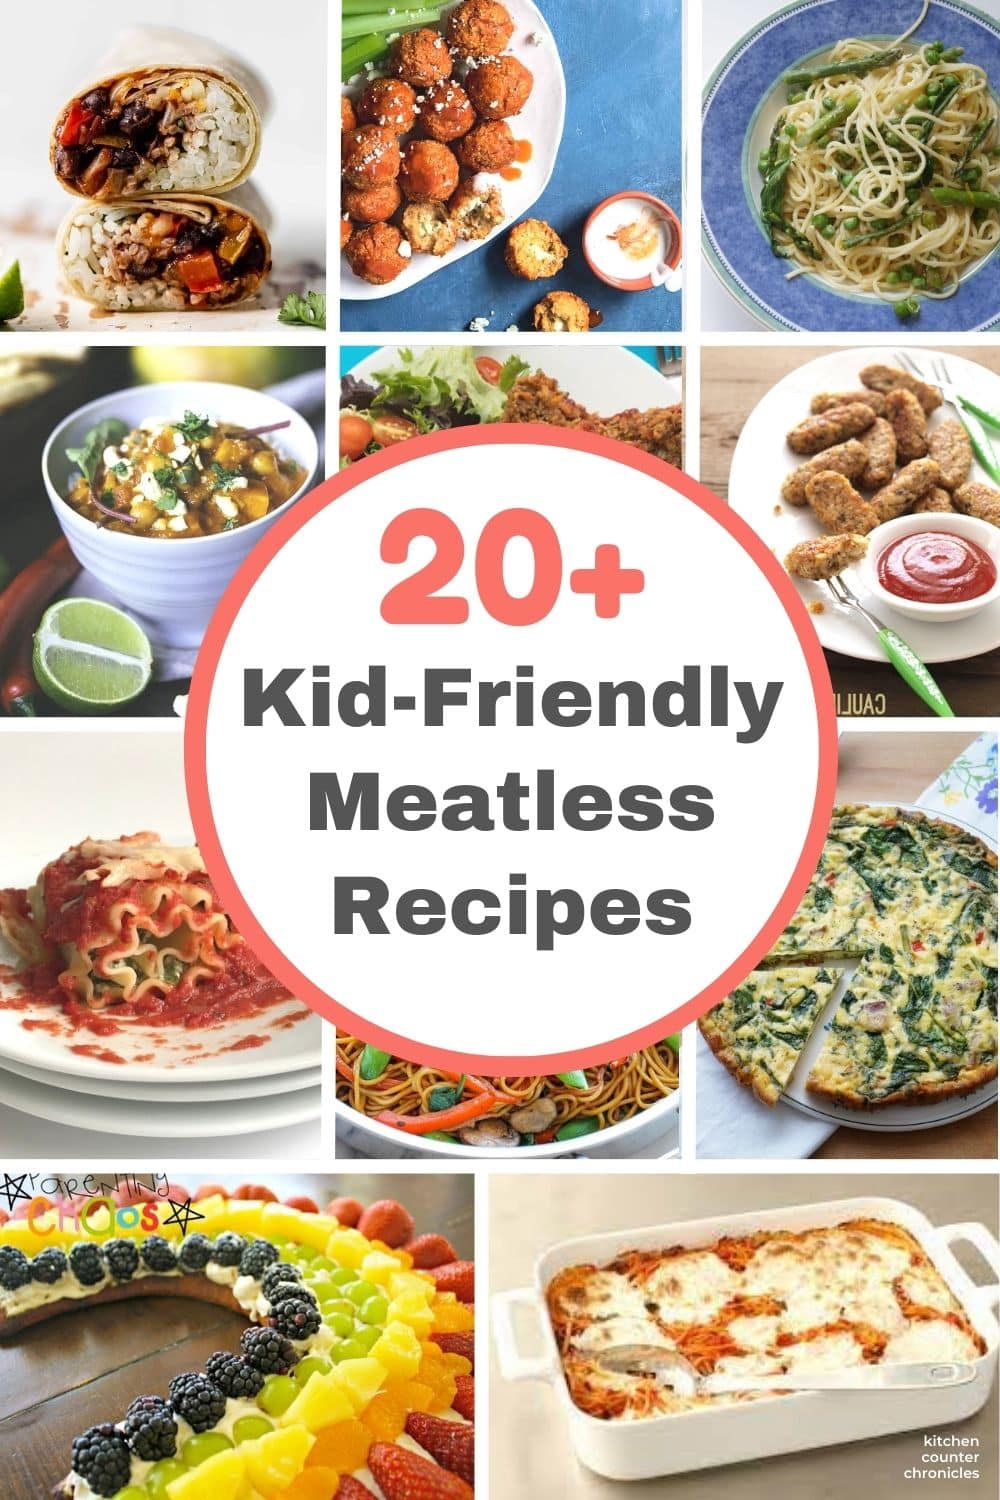 collage of images of kid-friendly meatless recipes and title